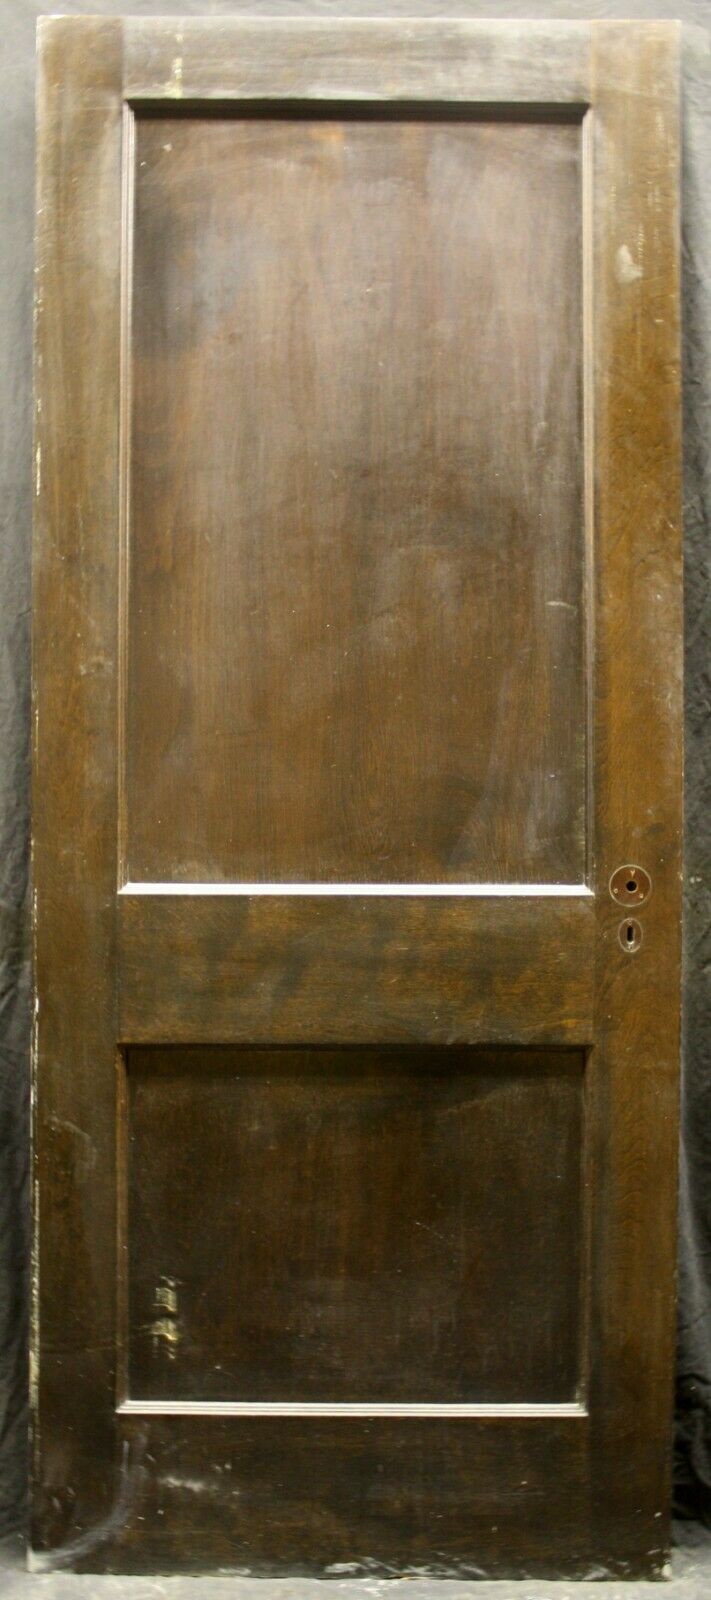 2 available 32"x79.5" Antique Vintage Reclaimed Salvaged Interior SOLID Wooden Doors 2 Two Panels